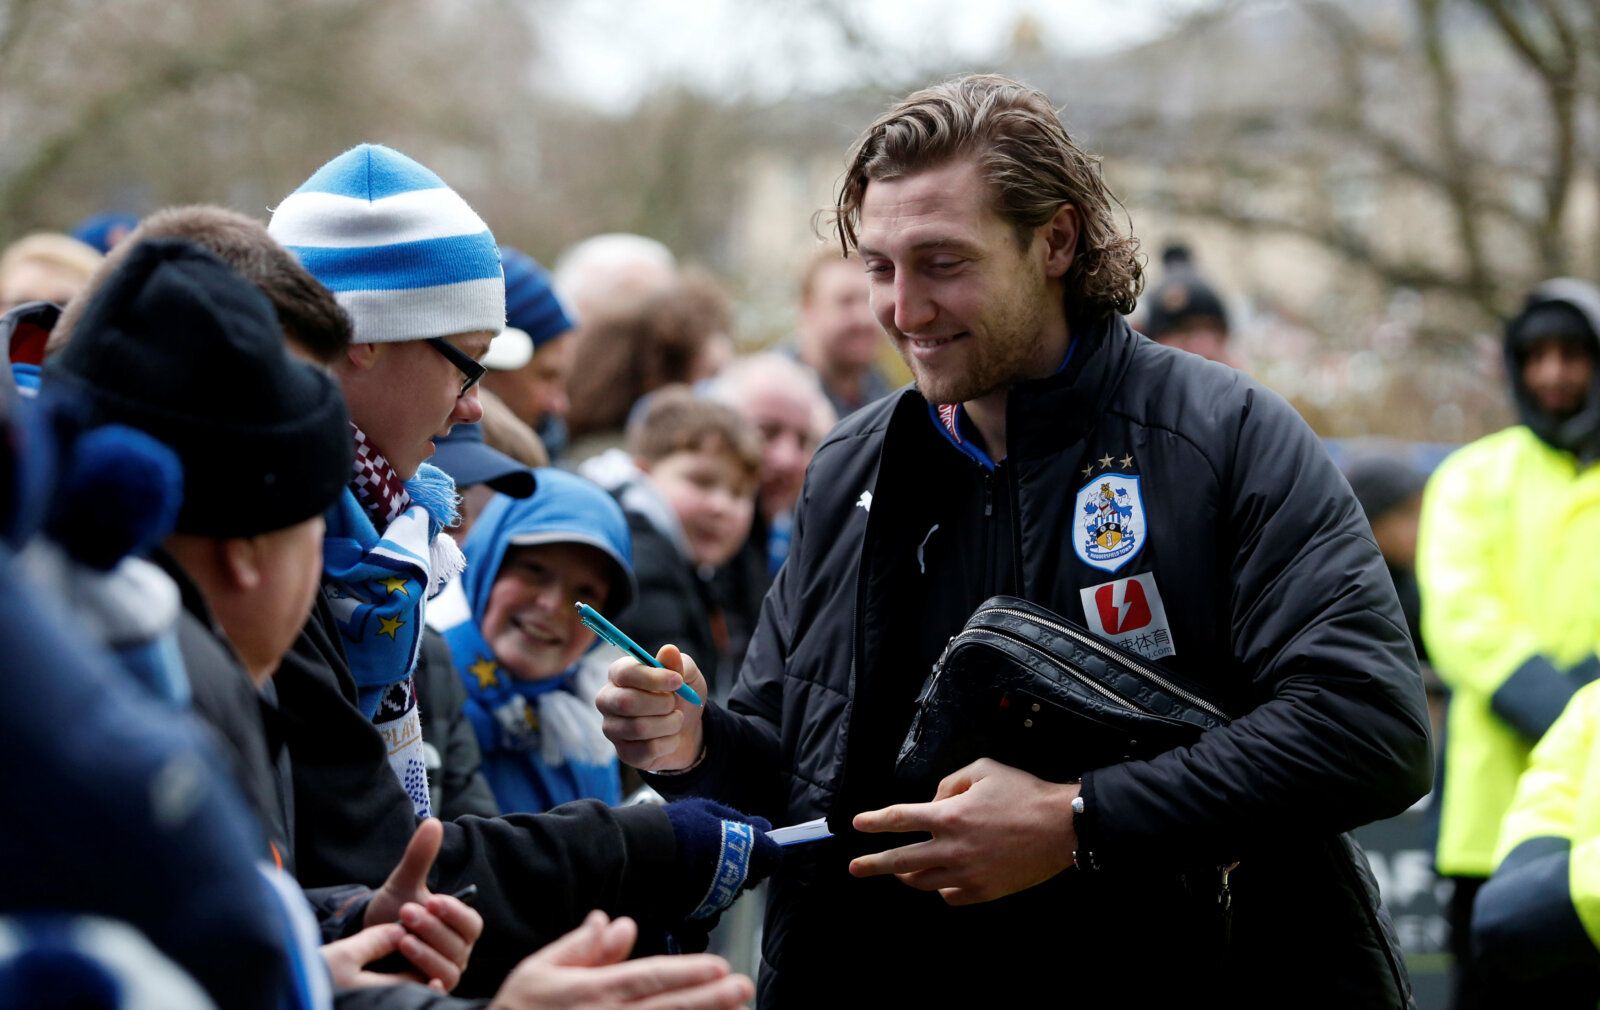 Soccer Football - Premier League - Huddersfield Town vs Burnley - John Smith’s Stadium, Huddersfield, Britain - December 30, 2017   Huddersfield's Michael Hefele arrives for the match   Action Images via Reuters/Ed Sykes    EDITORIAL USE ONLY. No use with unauthorized audio, video, data, fixture lists, club/league logos or 